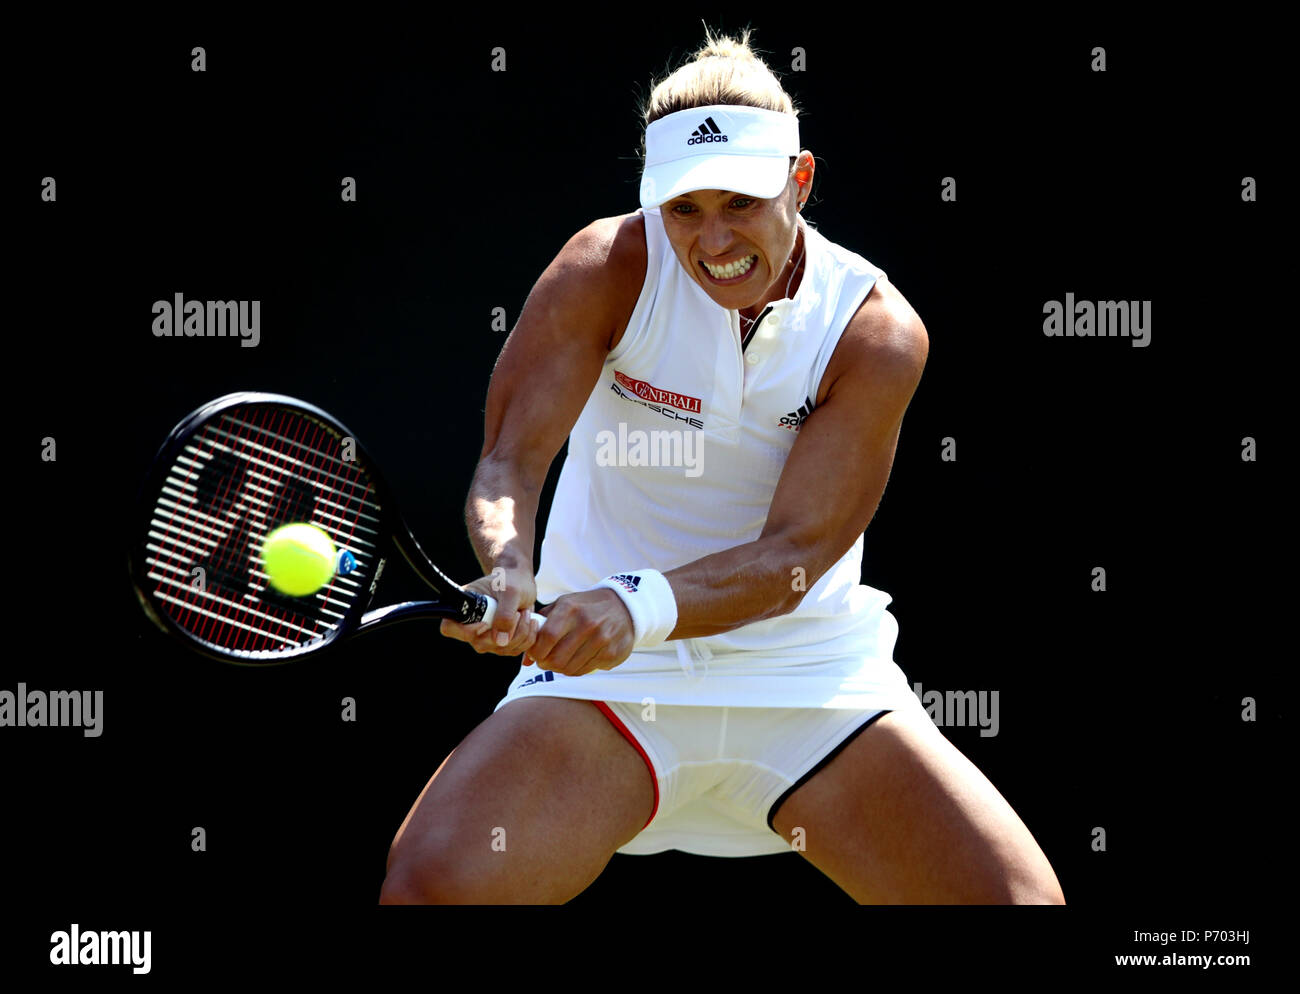 Angelique Kerber in action against Vera Zvonareva on day two of the Wimbledon Championships at the All England Lawn Tennis and Croquet Club, Wimbledon. Stock Photo